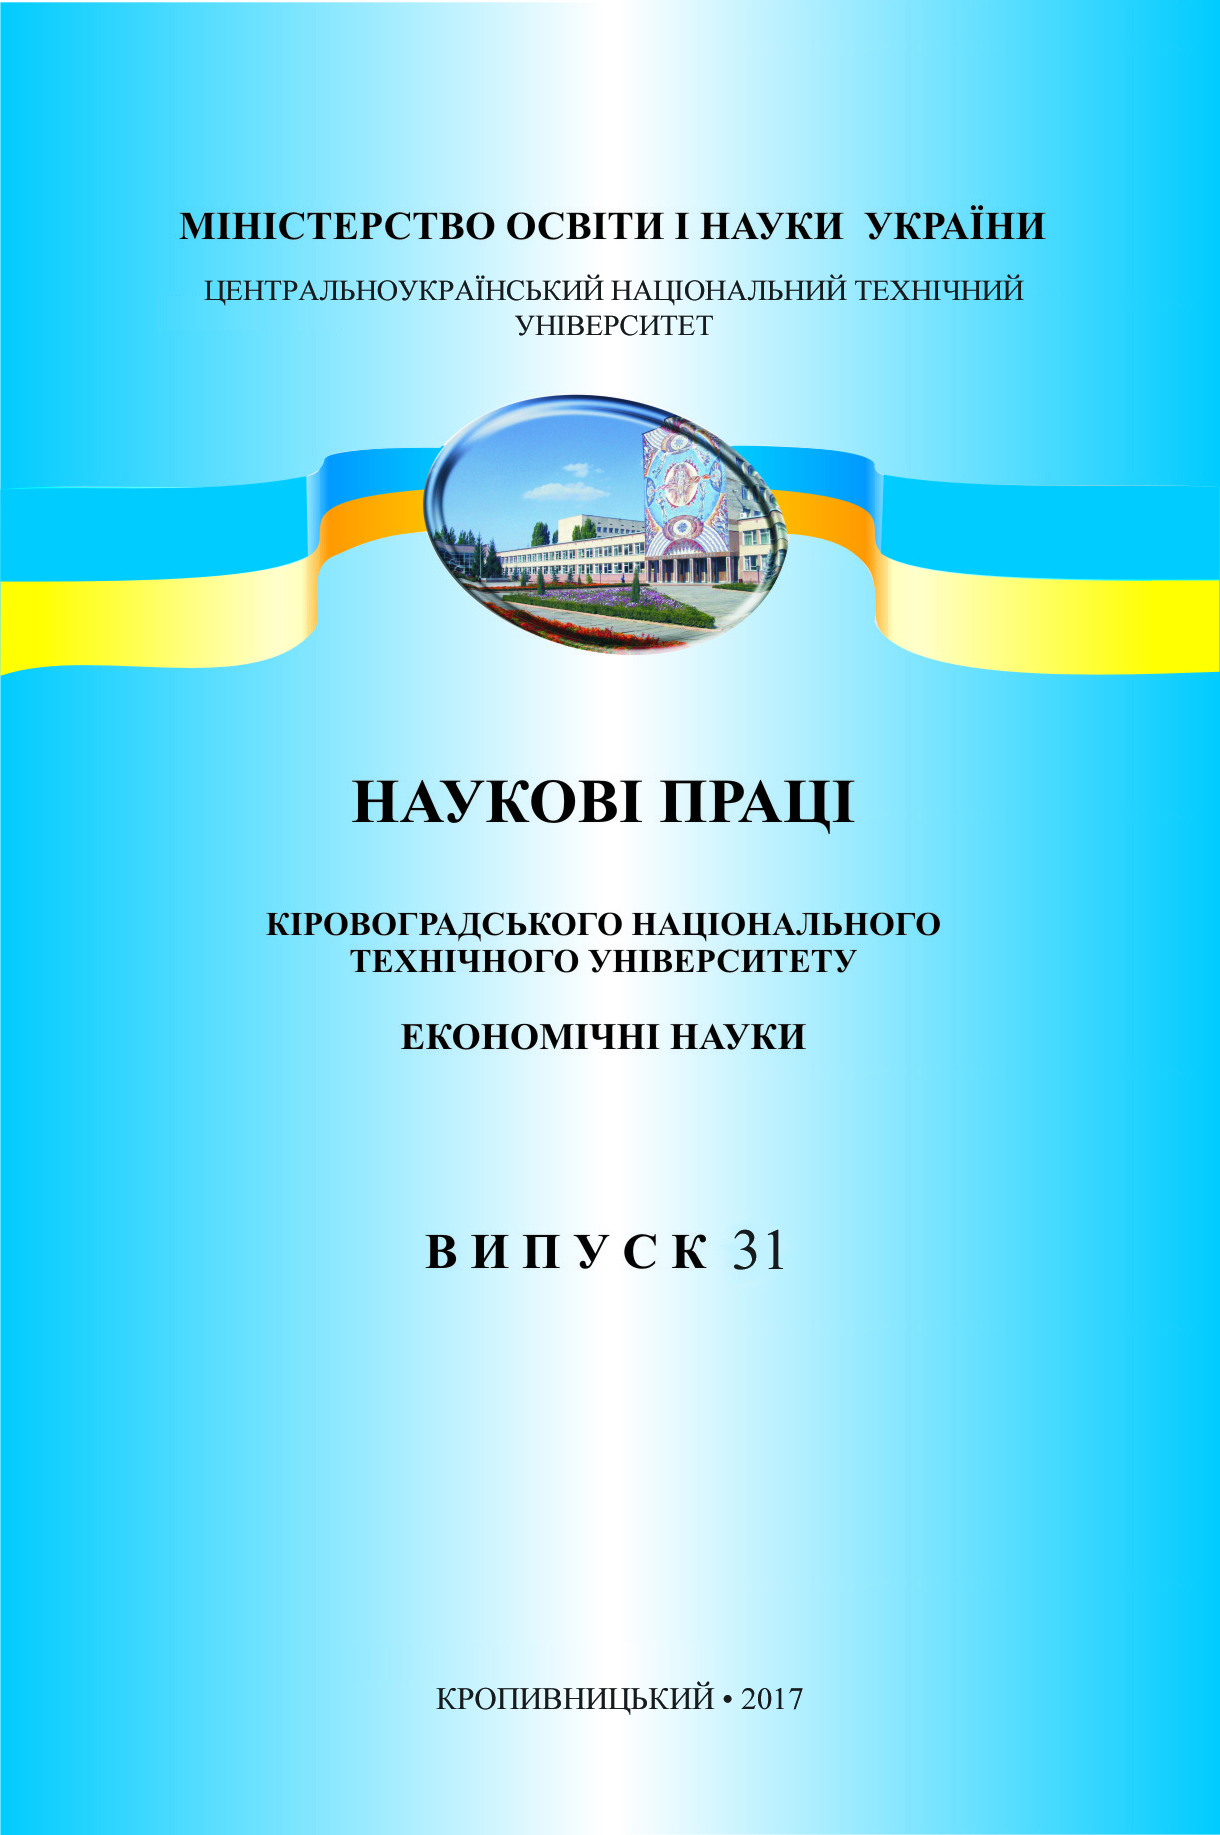 The Current State of Innovation Activity of Enterprises, Institutions, Organizations of Kirovohrad Region and Their Problems Cover Image